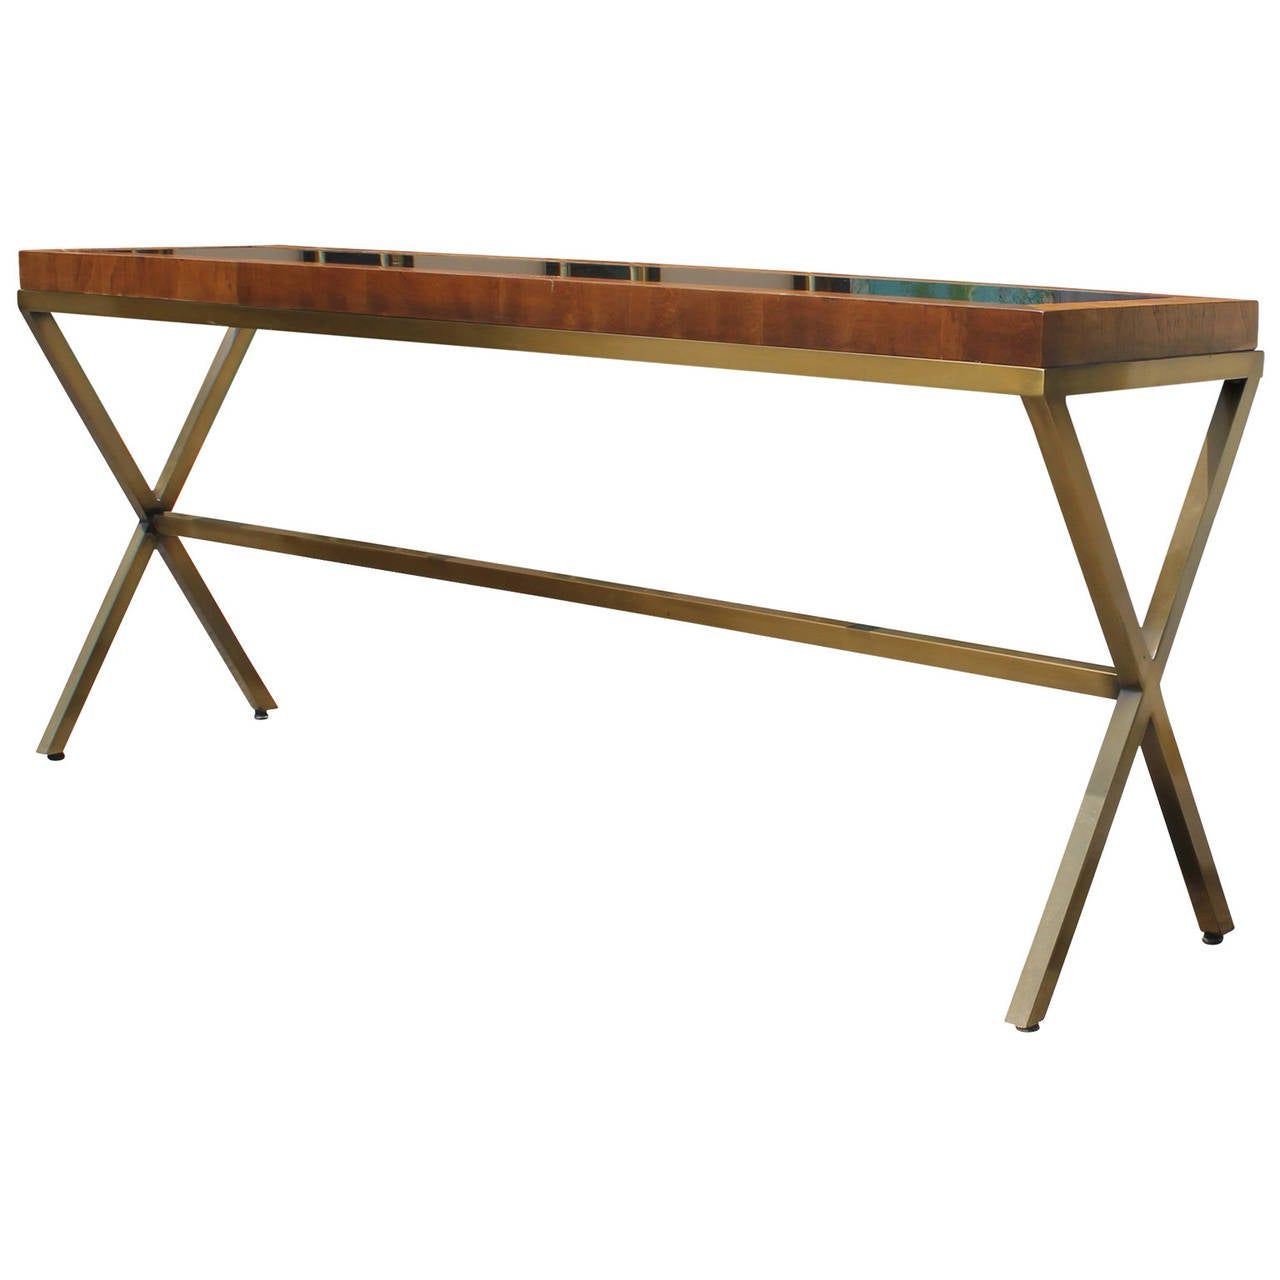 2020 Brass Smoked Glass Console Tables In Stunning Brass, Smoked Glass, And Burl Wood Console At 1stdibs (View 2 of 10)